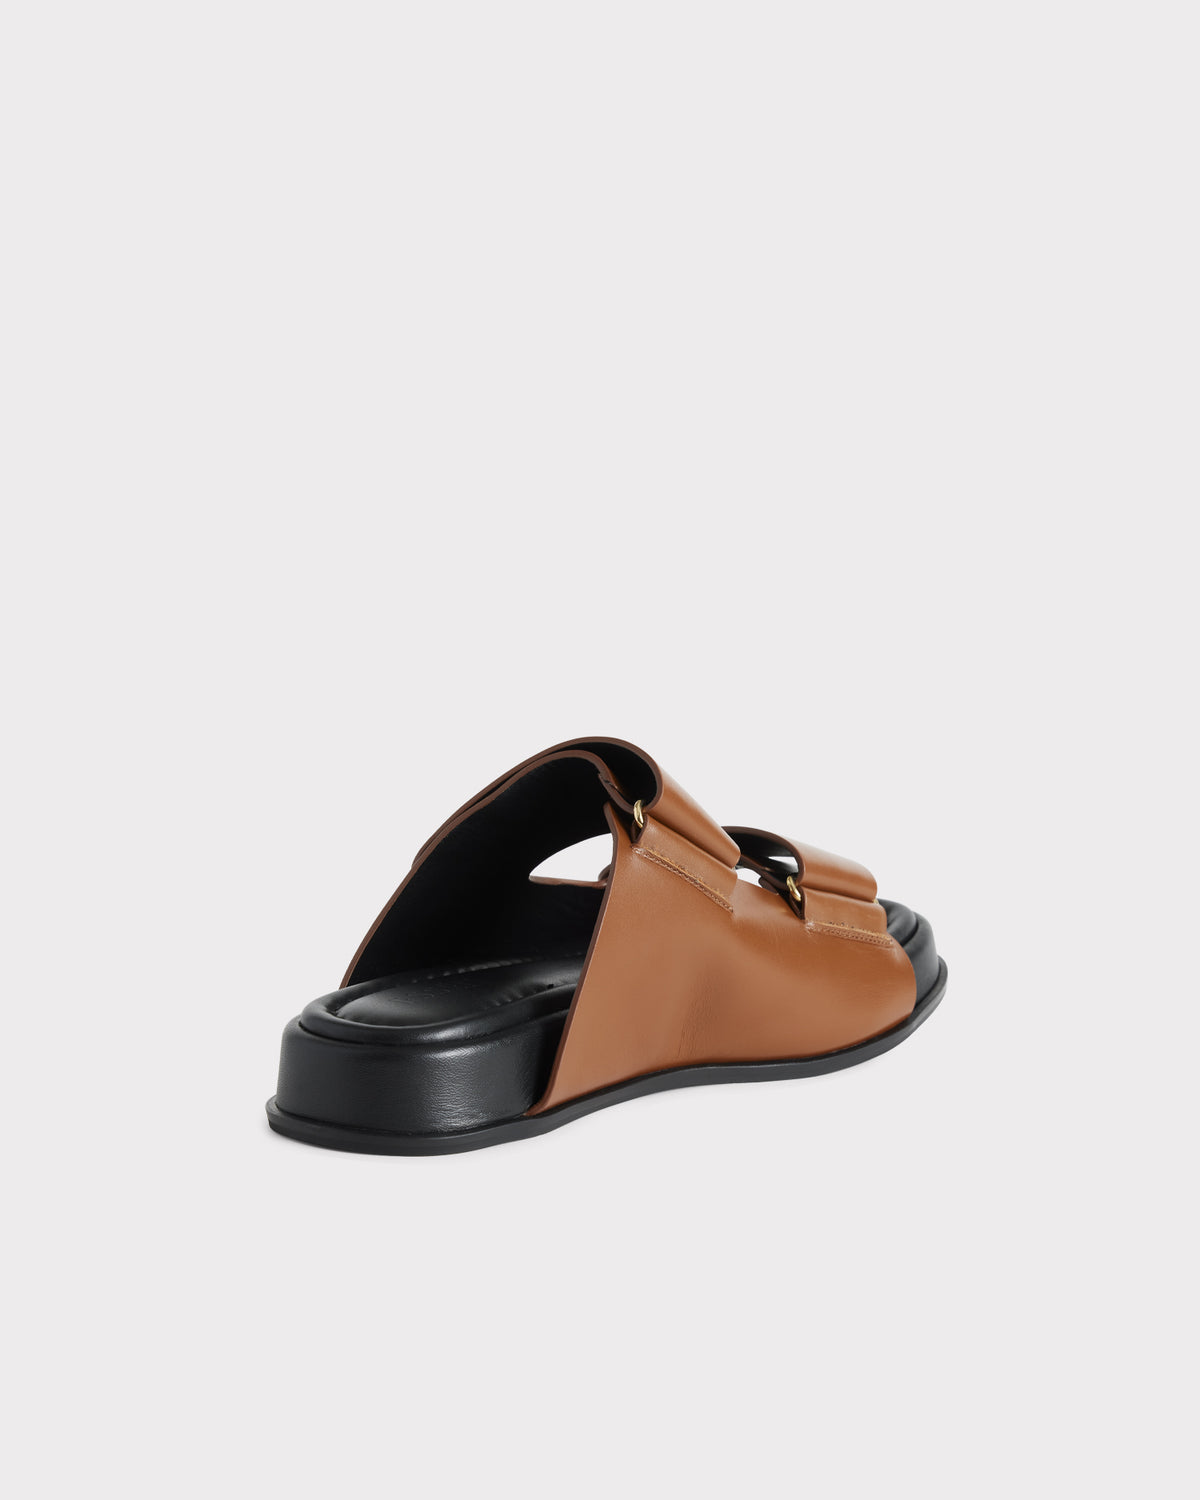 ethical shoe brand summer sandal in brown leathern